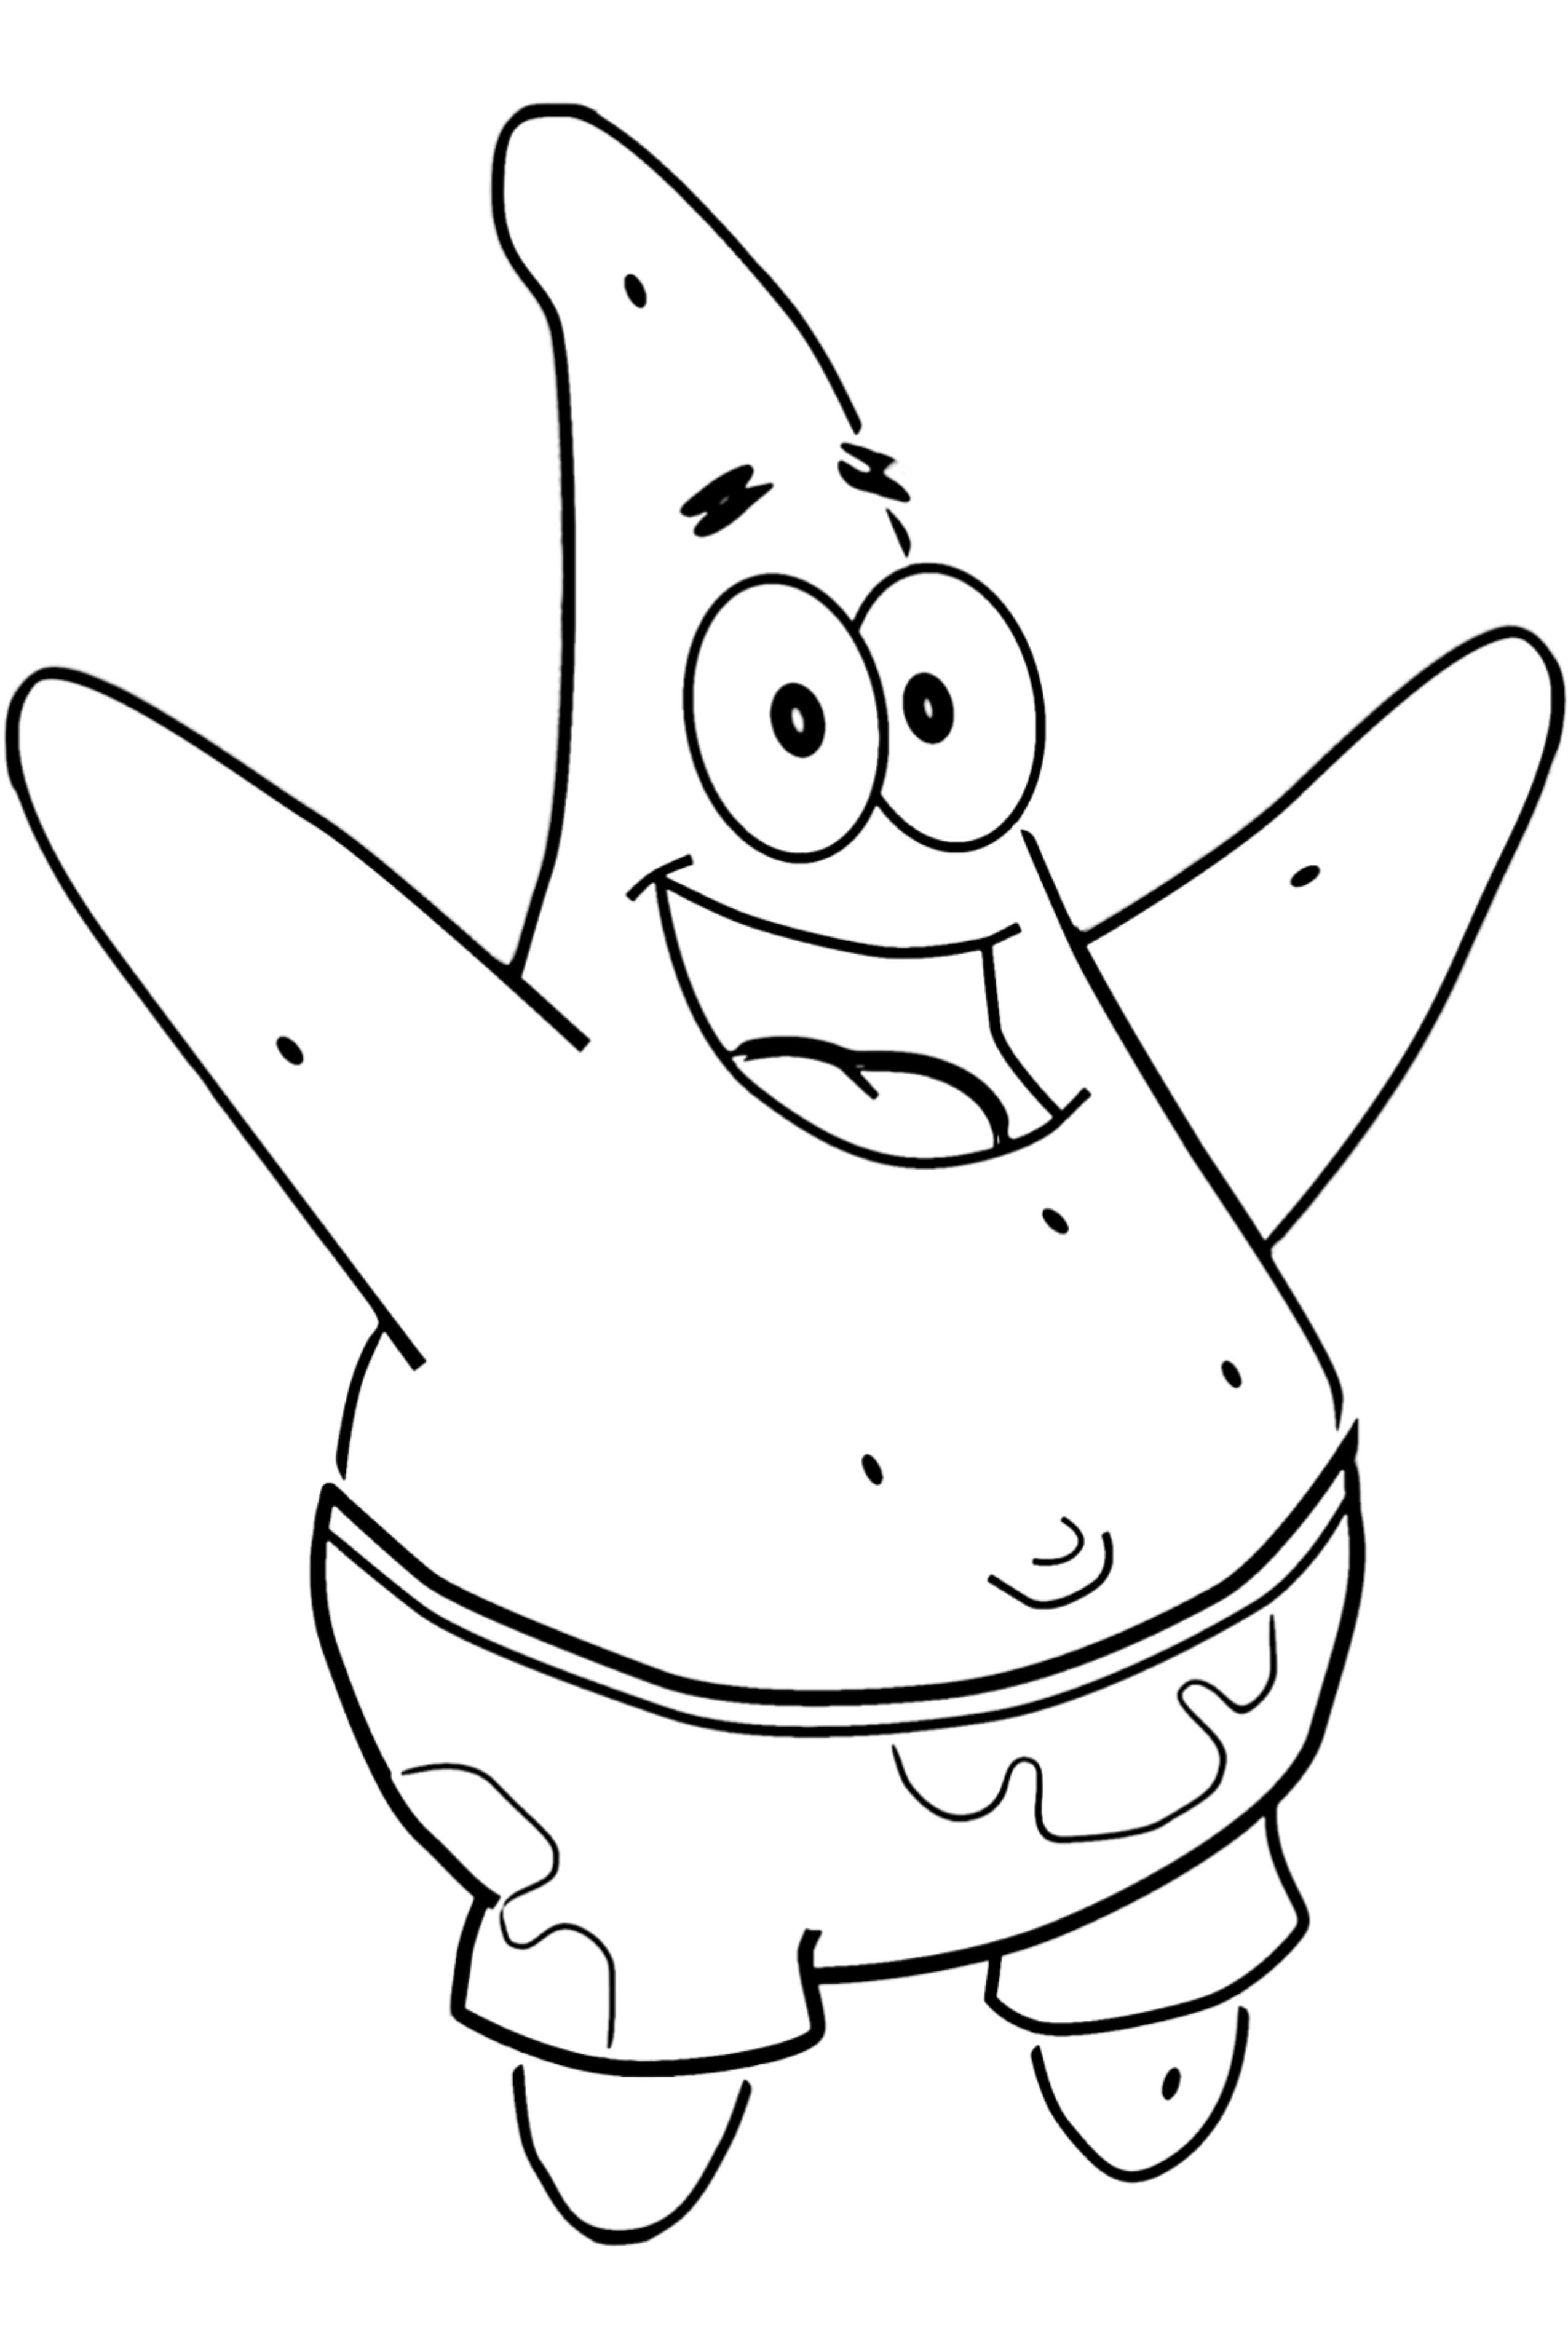 Funny Spongebob Coloring Pages Printables 51